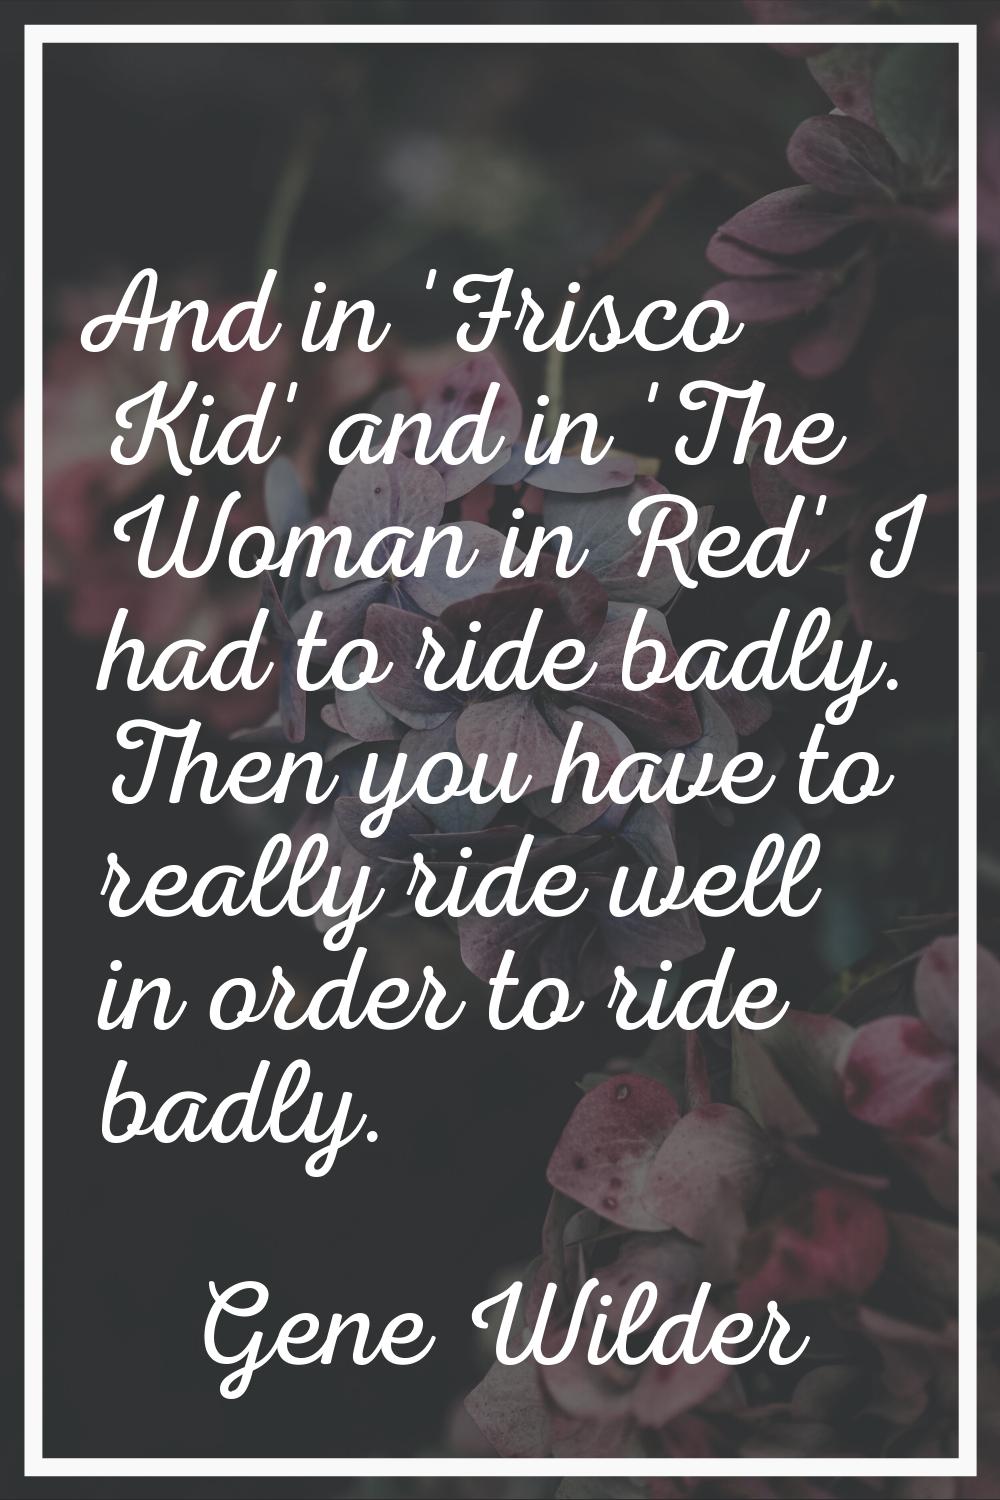 And in 'Frisco Kid' and in 'The Woman in Red' I had to ride badly. Then you have to really ride wel